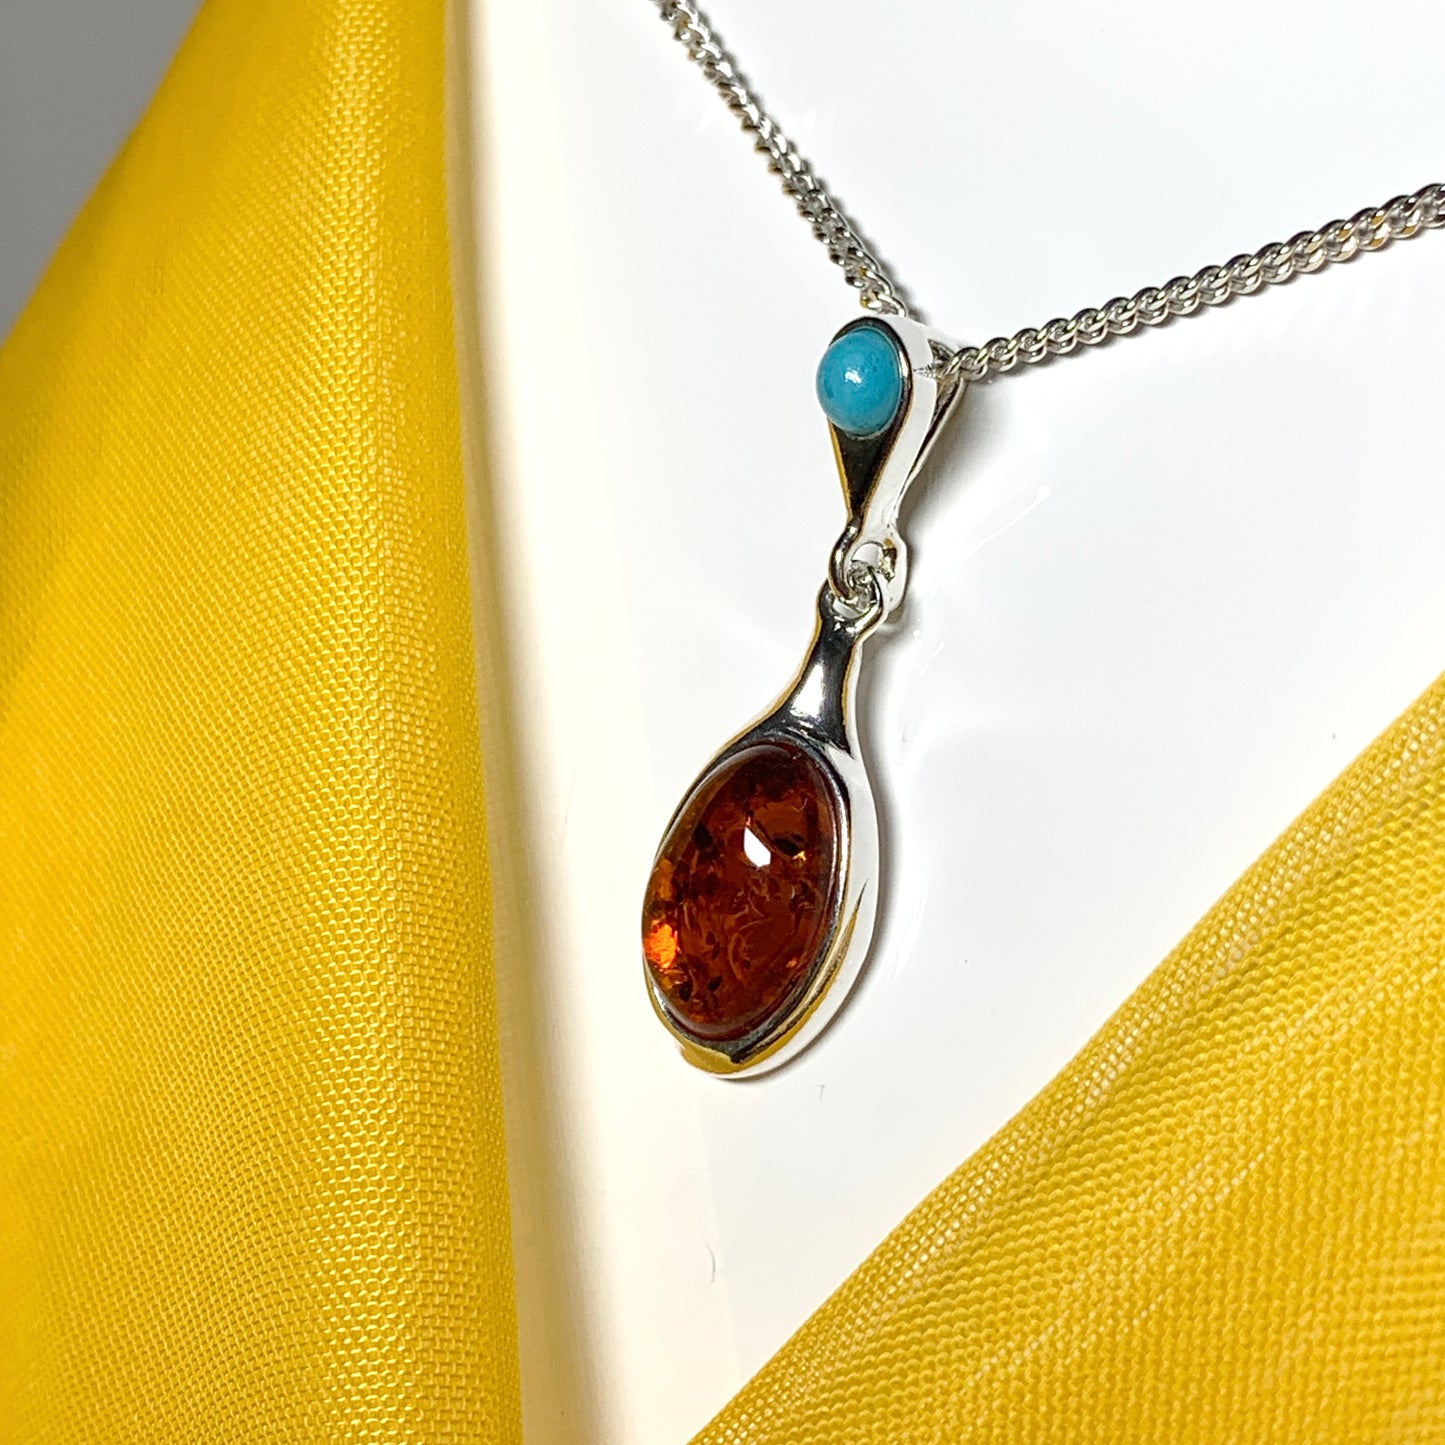 Real amber and turquoise necklace sterling silver pendant